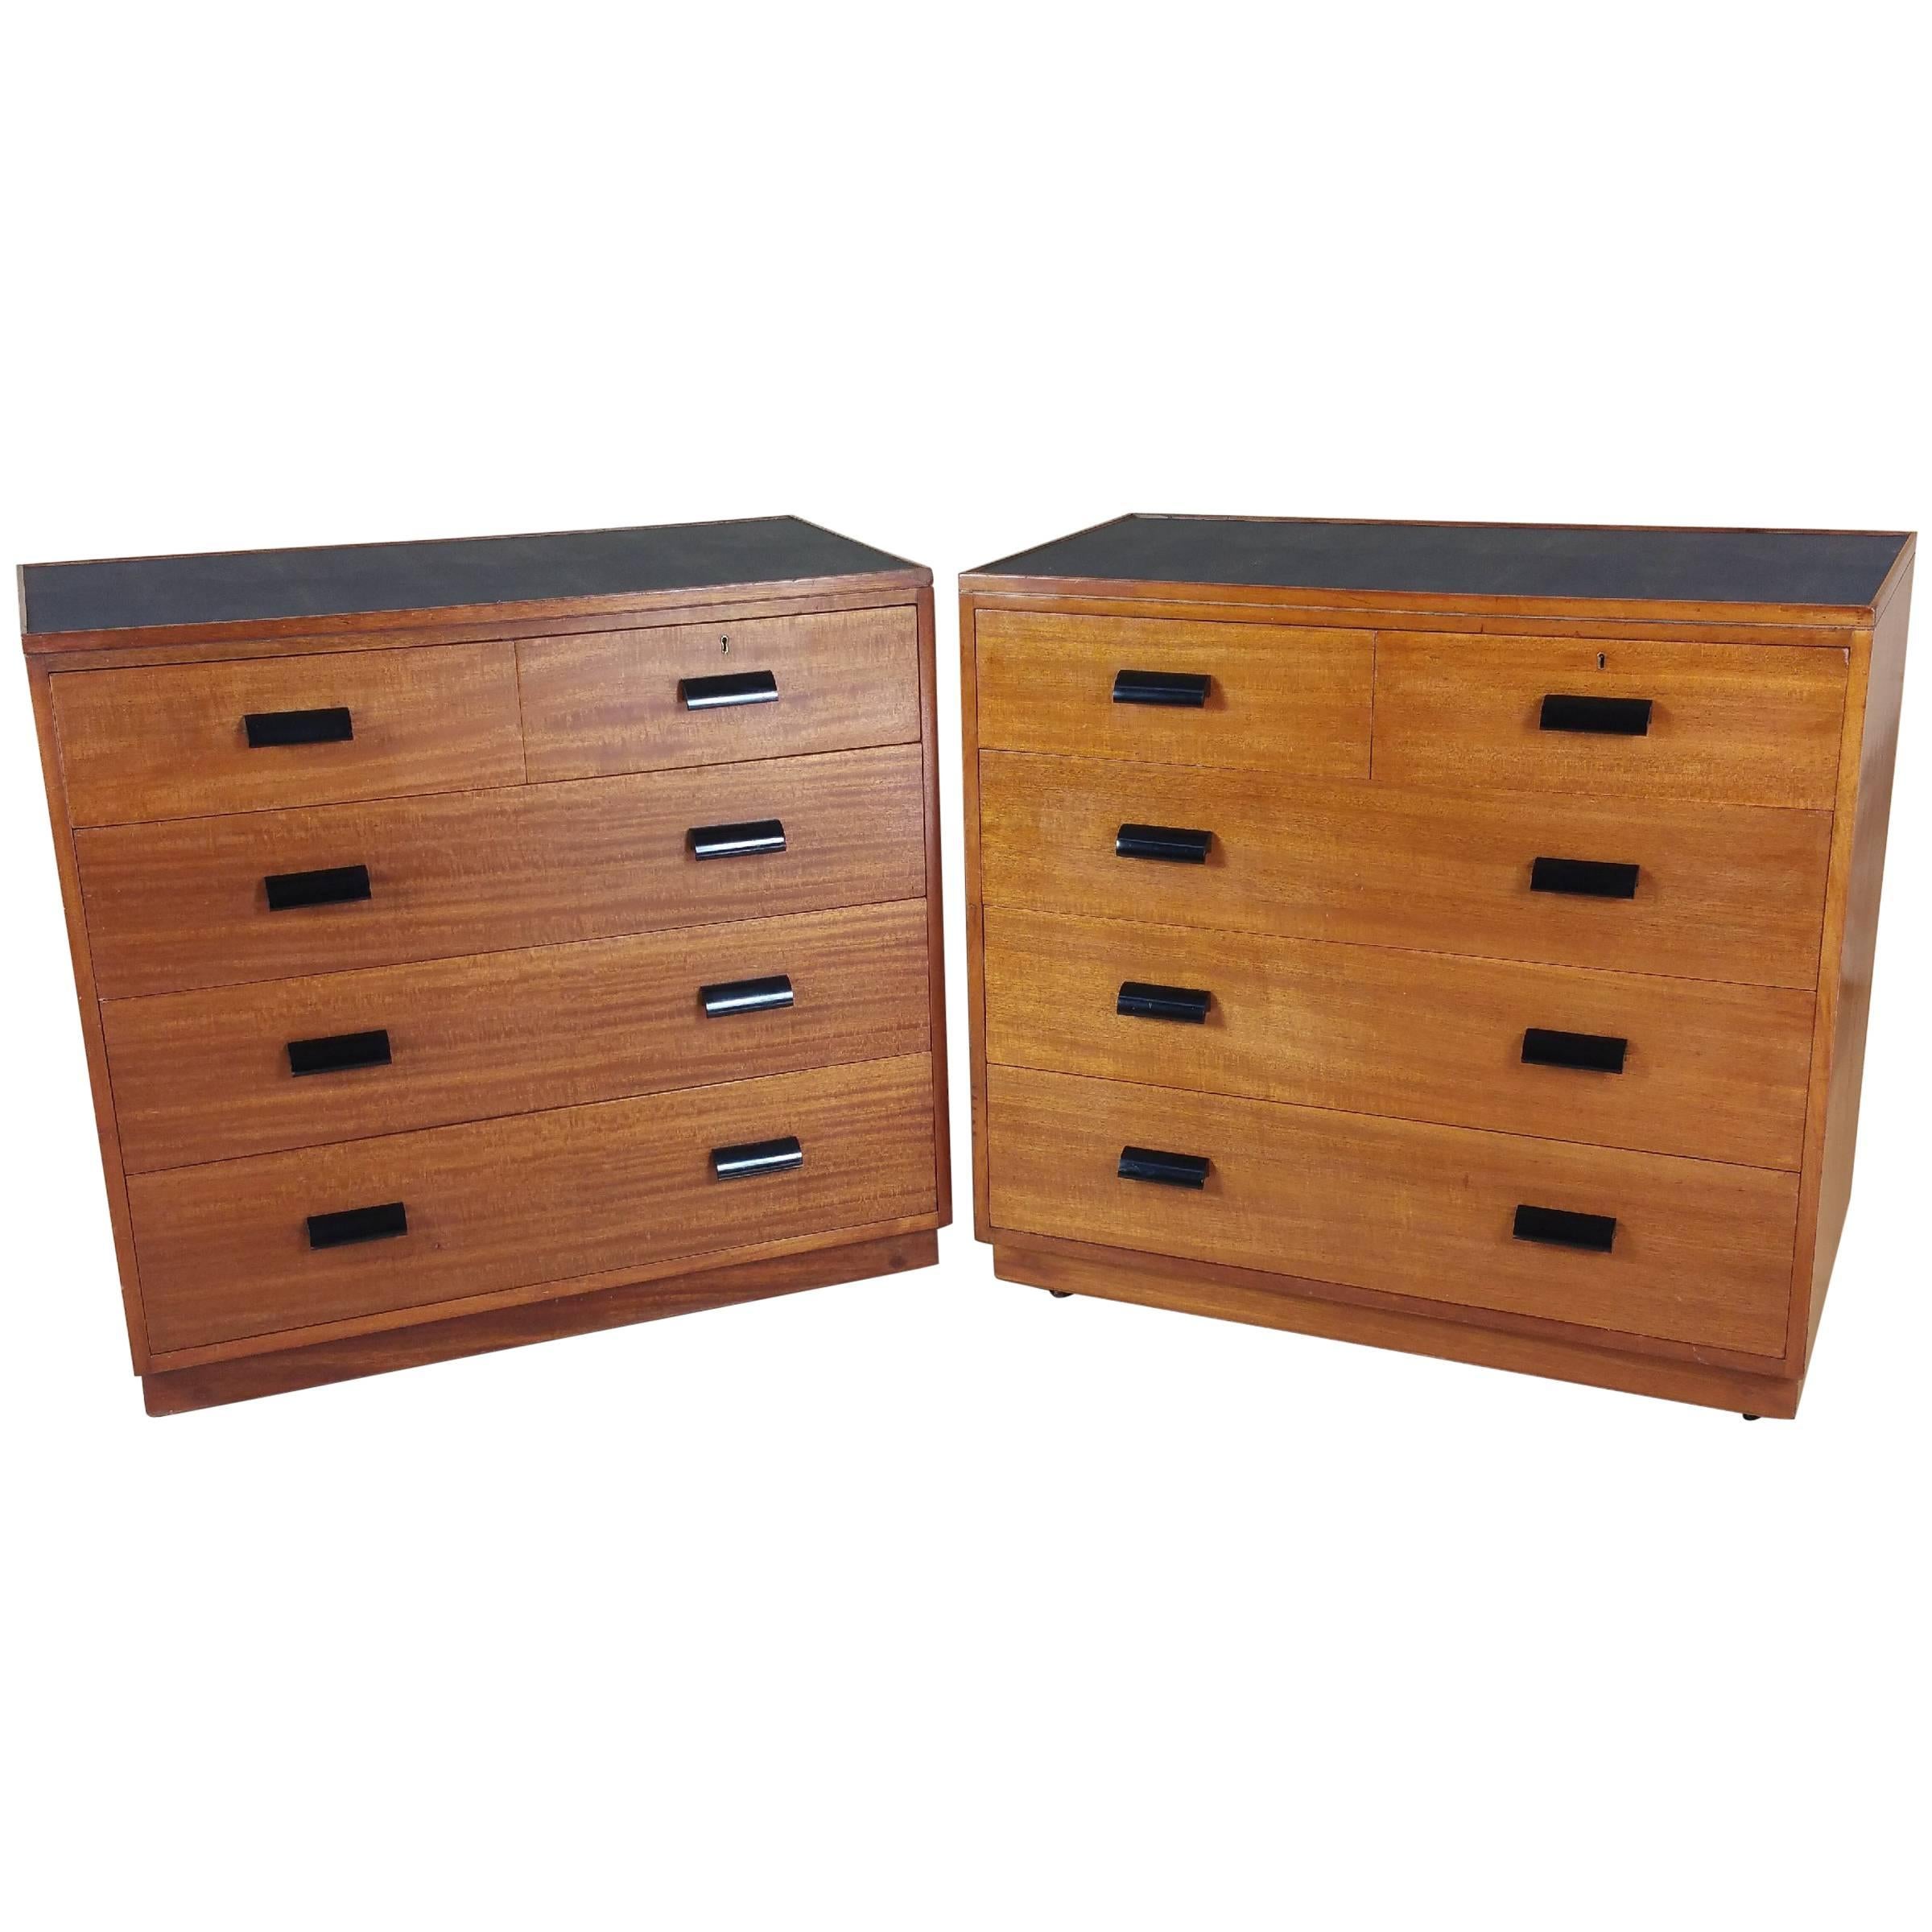 Pair of Early 20th Century Teak Chest of Drawers with Faux Shagreen Inset Tops